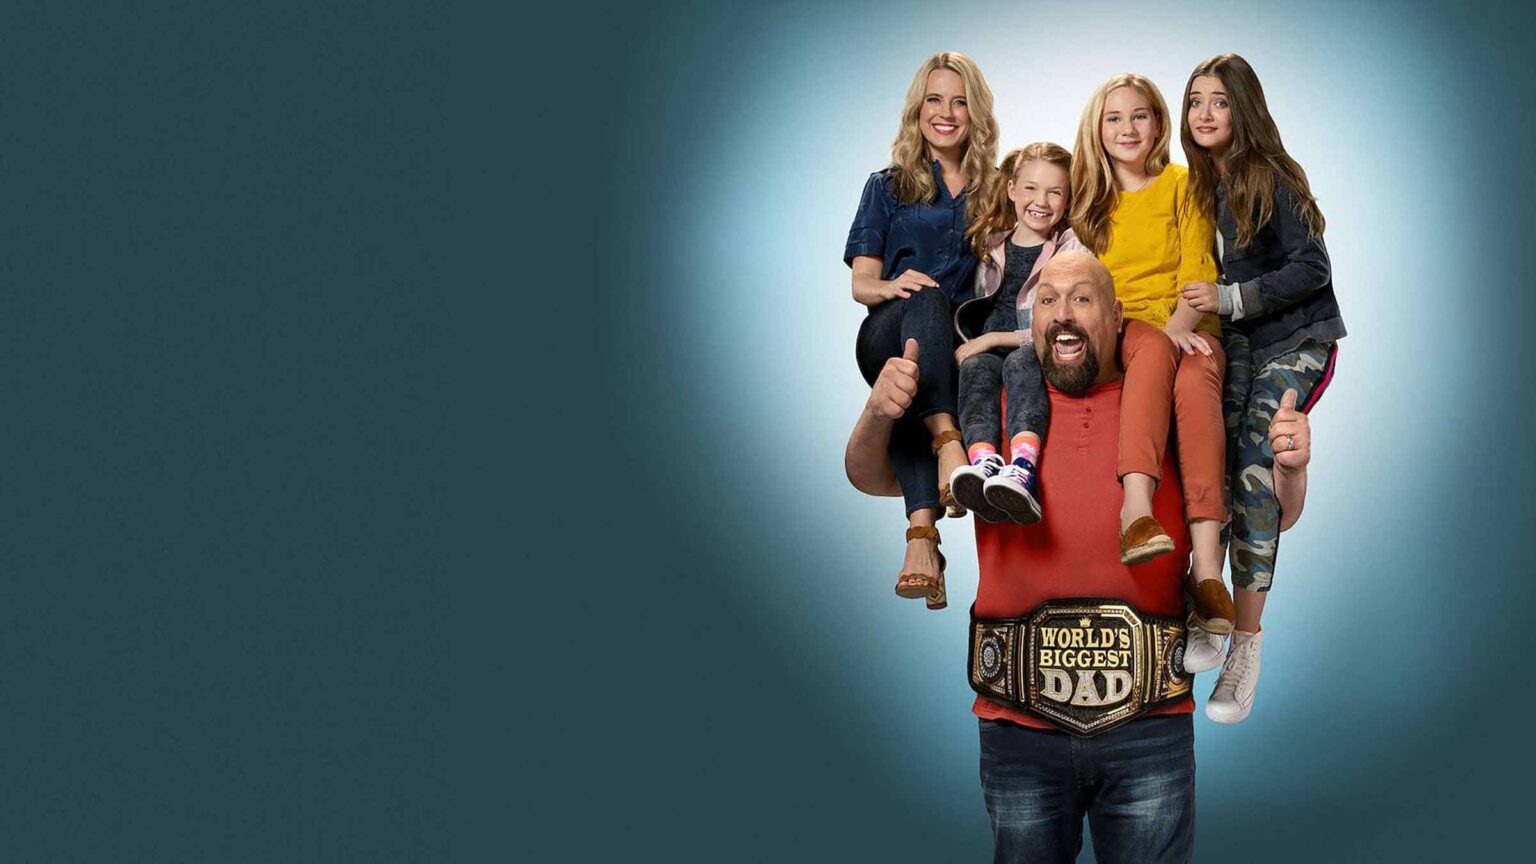 With quarantine stopping WWE events, wrestling fans are turning to an unique place for entertainment: Big Show's new Netflix series 'The Big Show Show'.